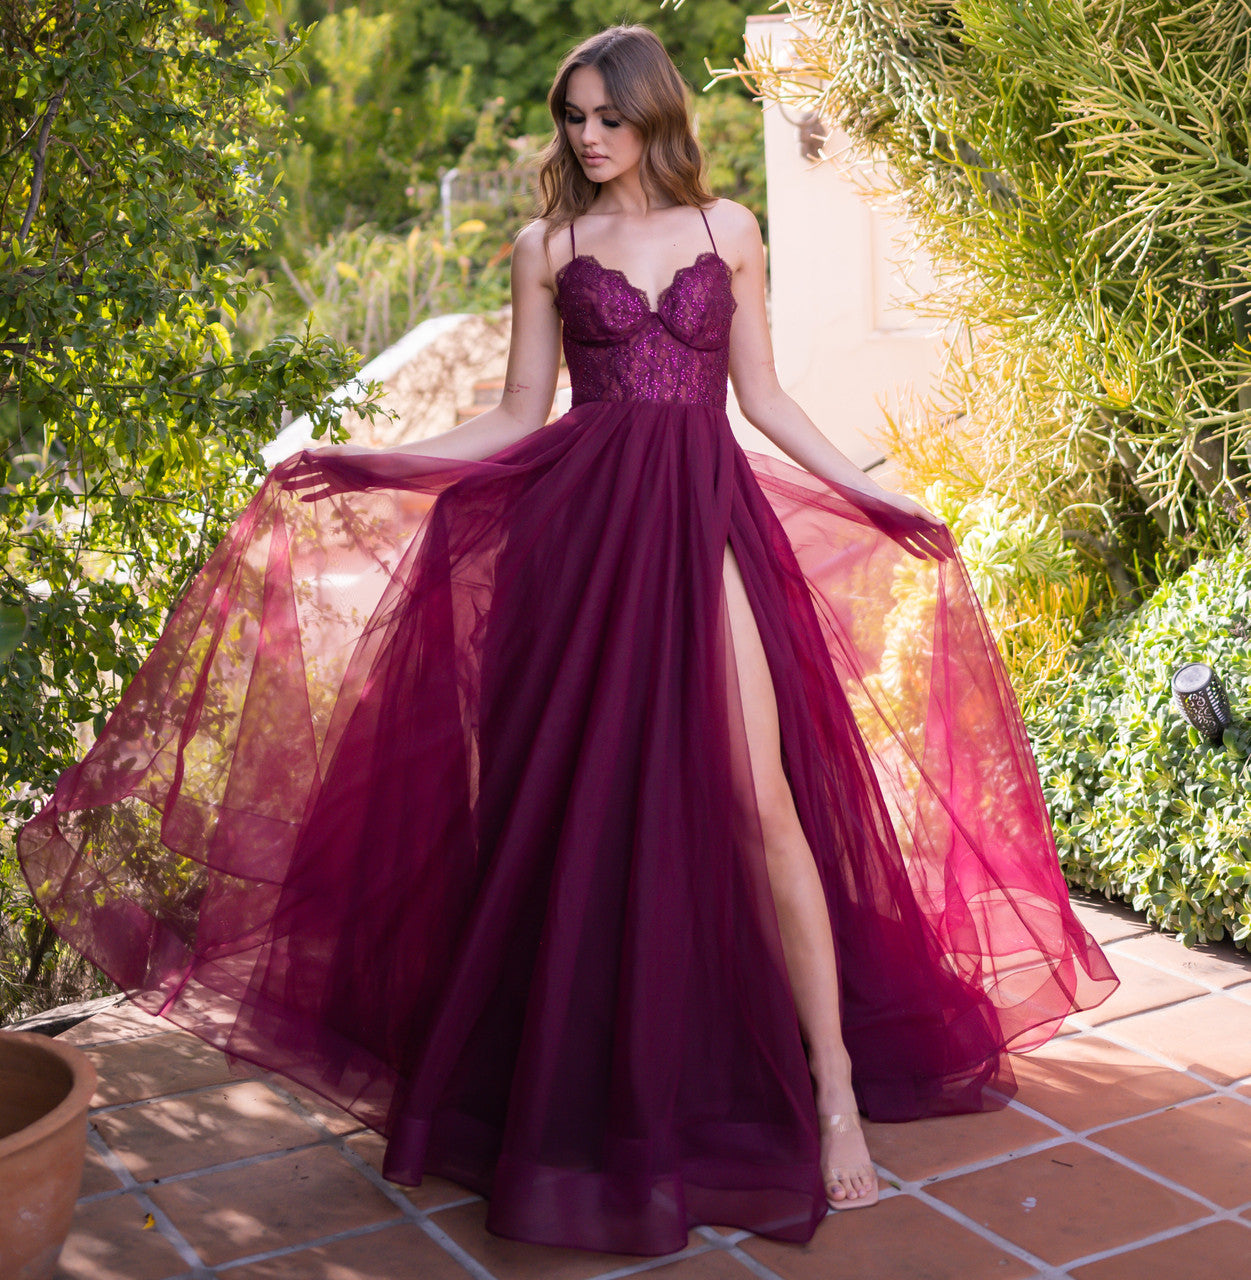 Dani Gown - Mulberry